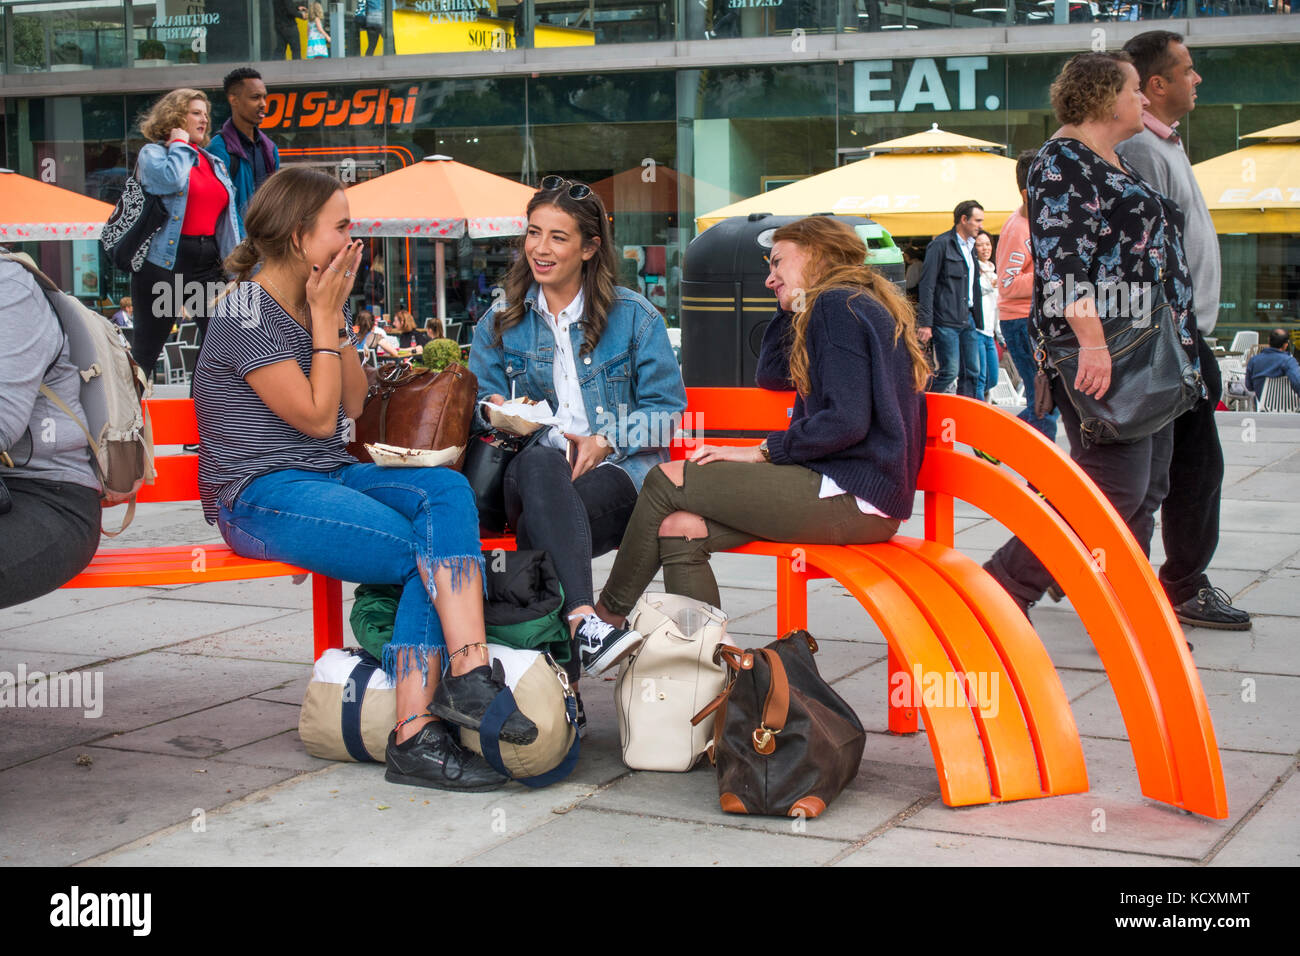 Three young women friends sitting chatting on a bright orange bench, with people passing by, on a busy South Bank, London, England, UK. Stock Photo